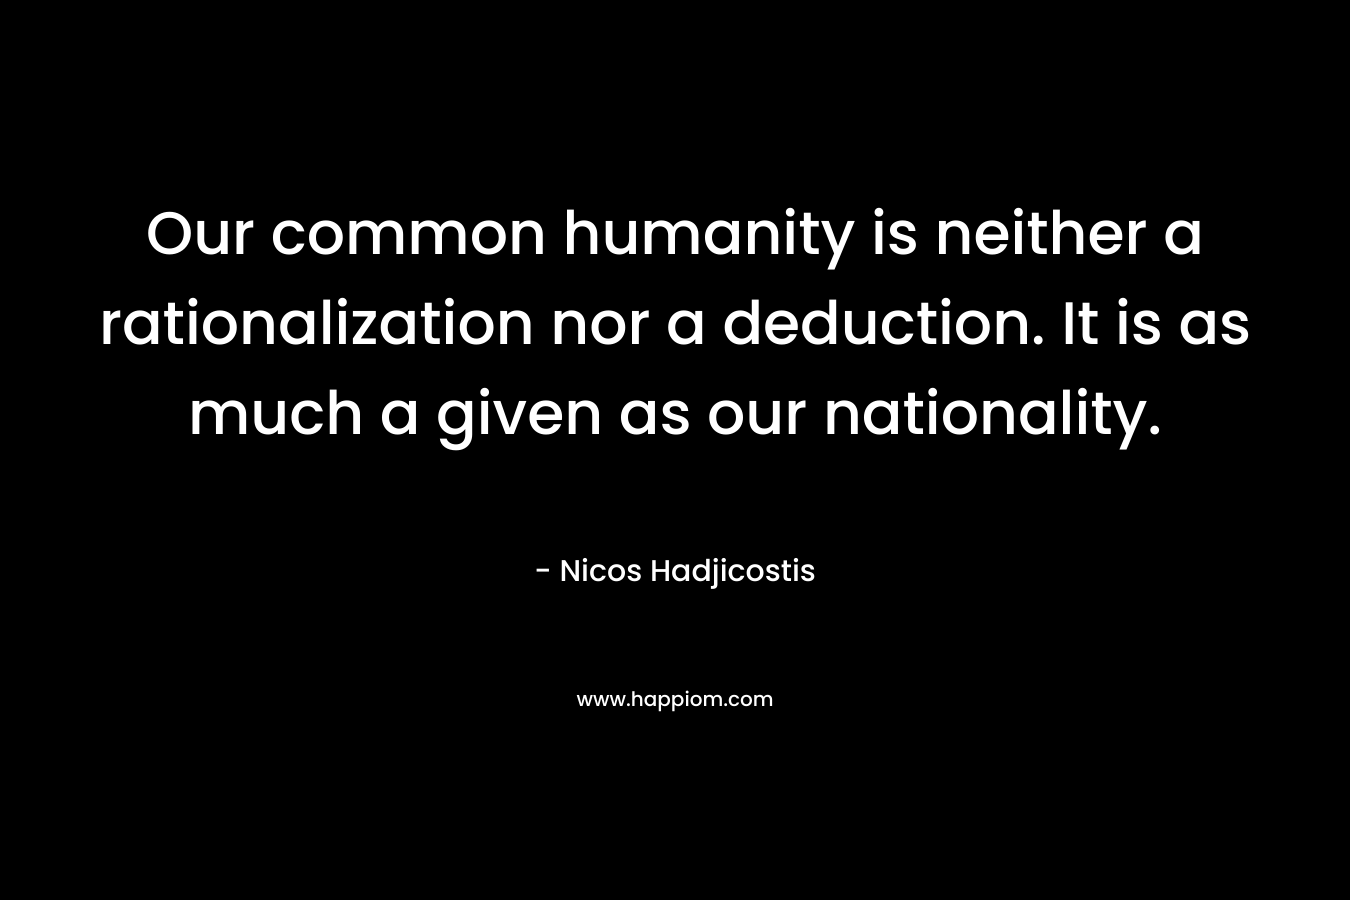 Our common humanity is neither a rationalization nor a deduction. It is as much a given as our nationality. – Nicos Hadjicostis